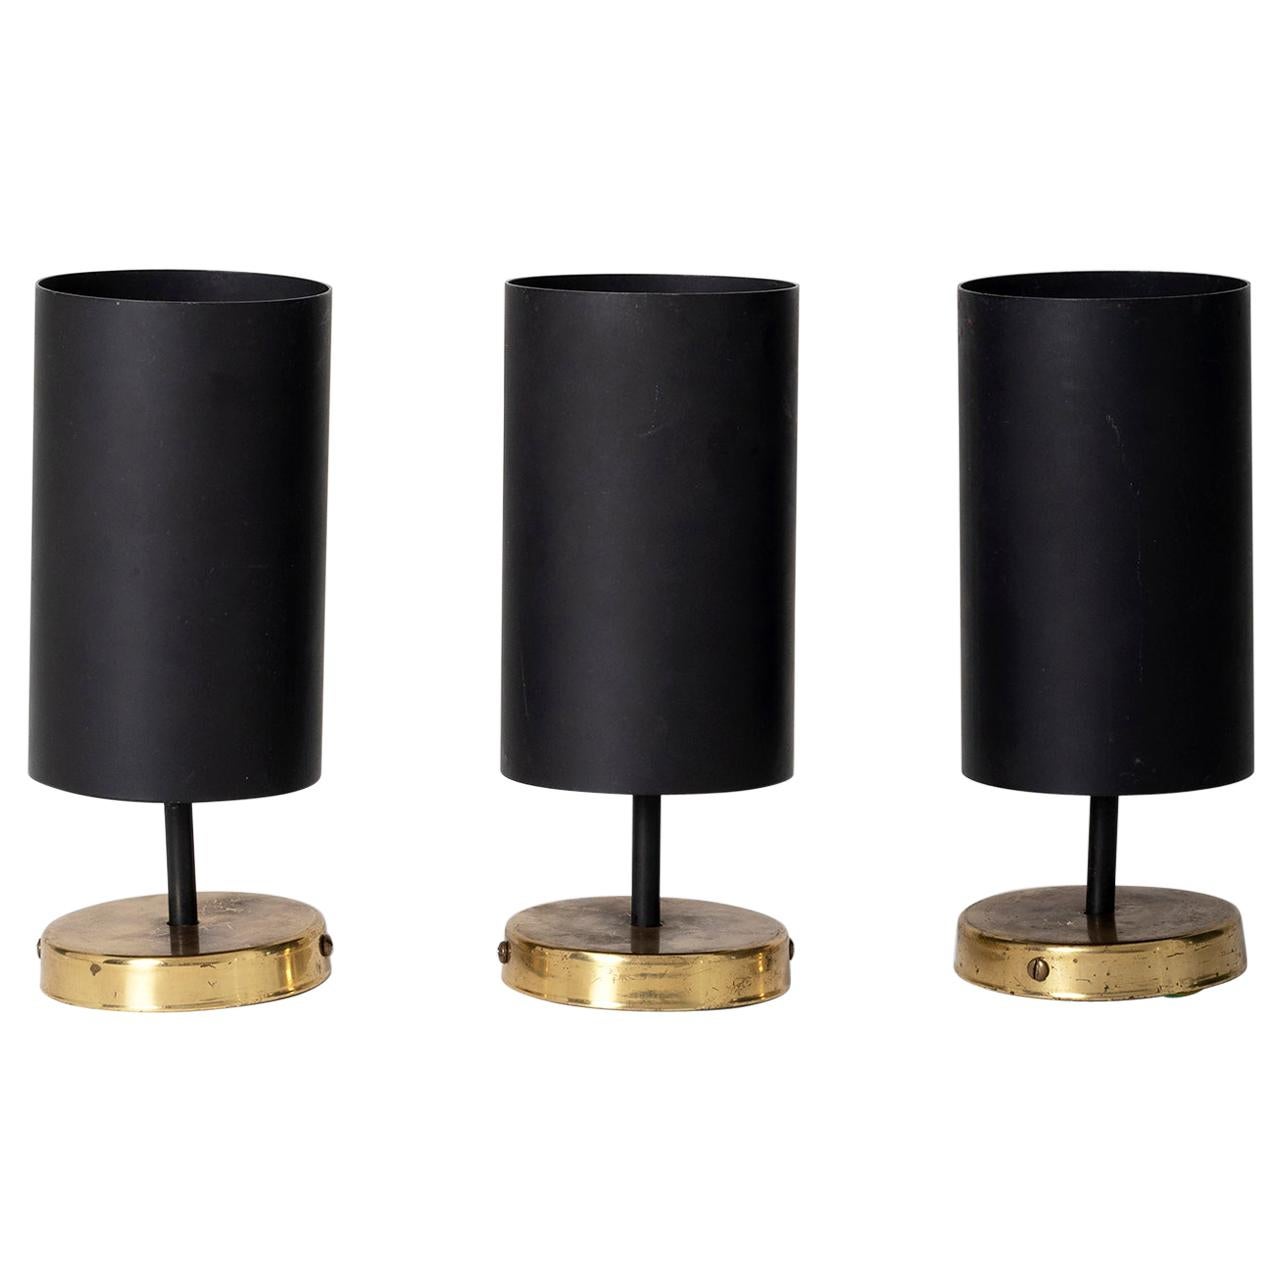 Set of 3 Brass and Black Spot Lights 'or Wall lights' by Parscot Editions